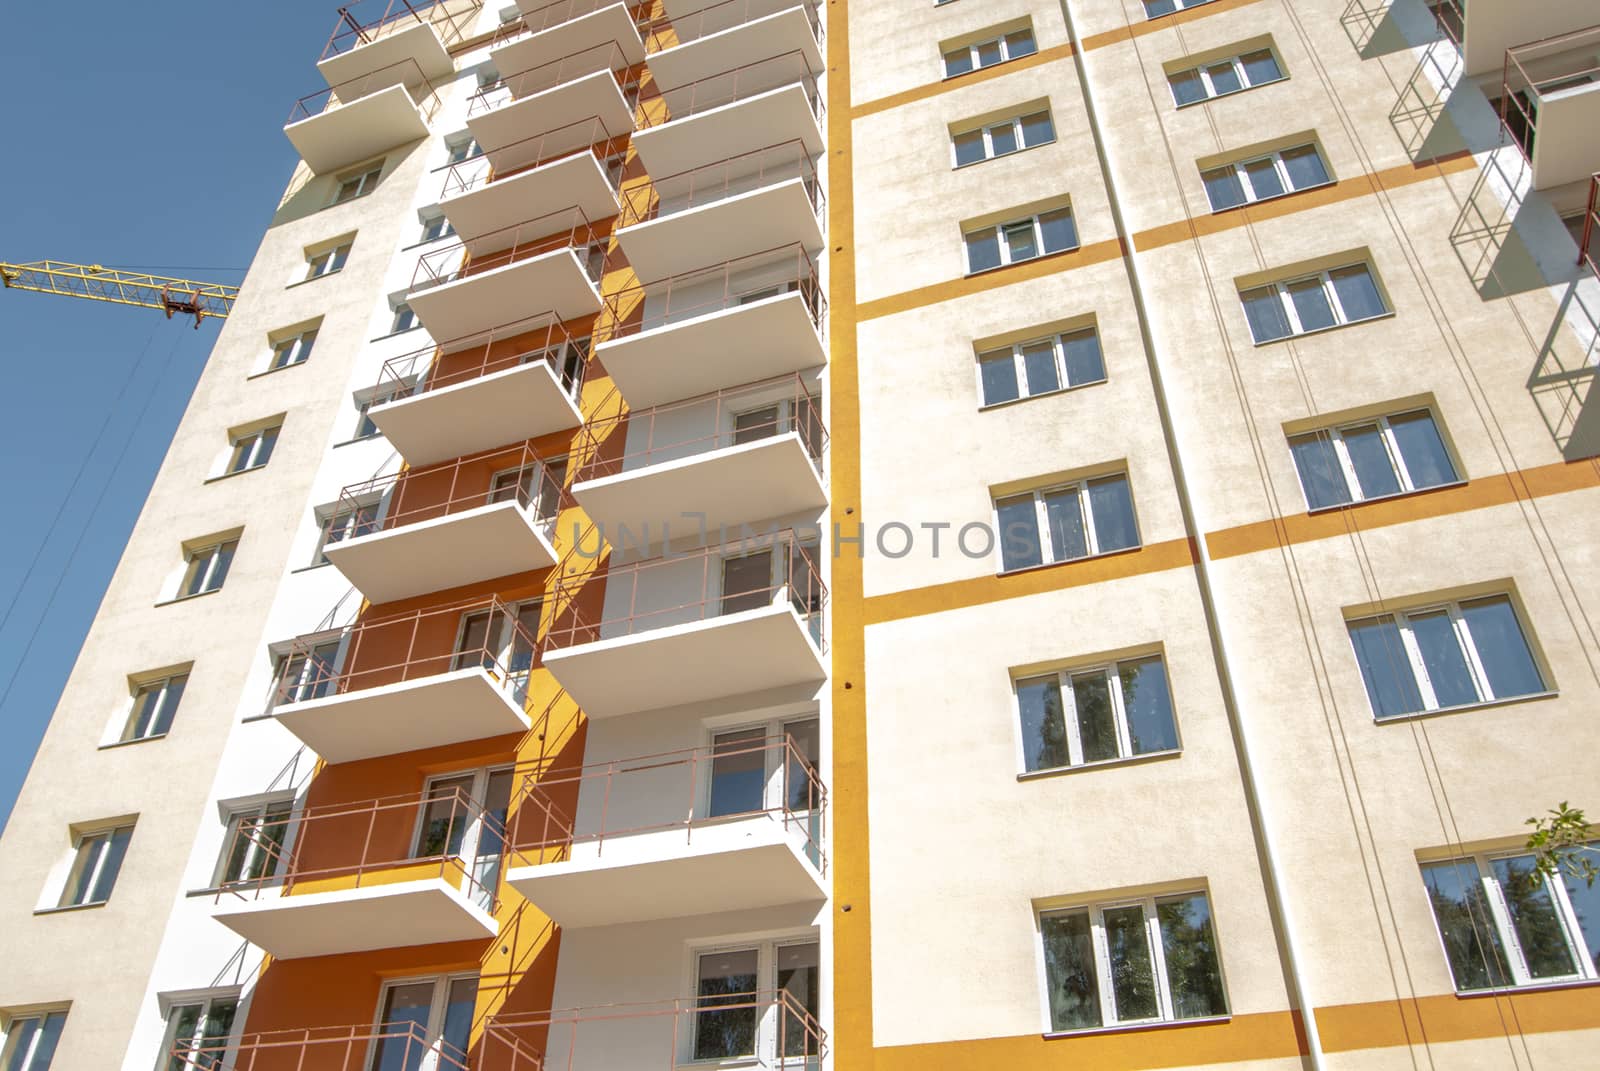 kind of new multistory residential building decorated in orange and yellow colors in sunny day